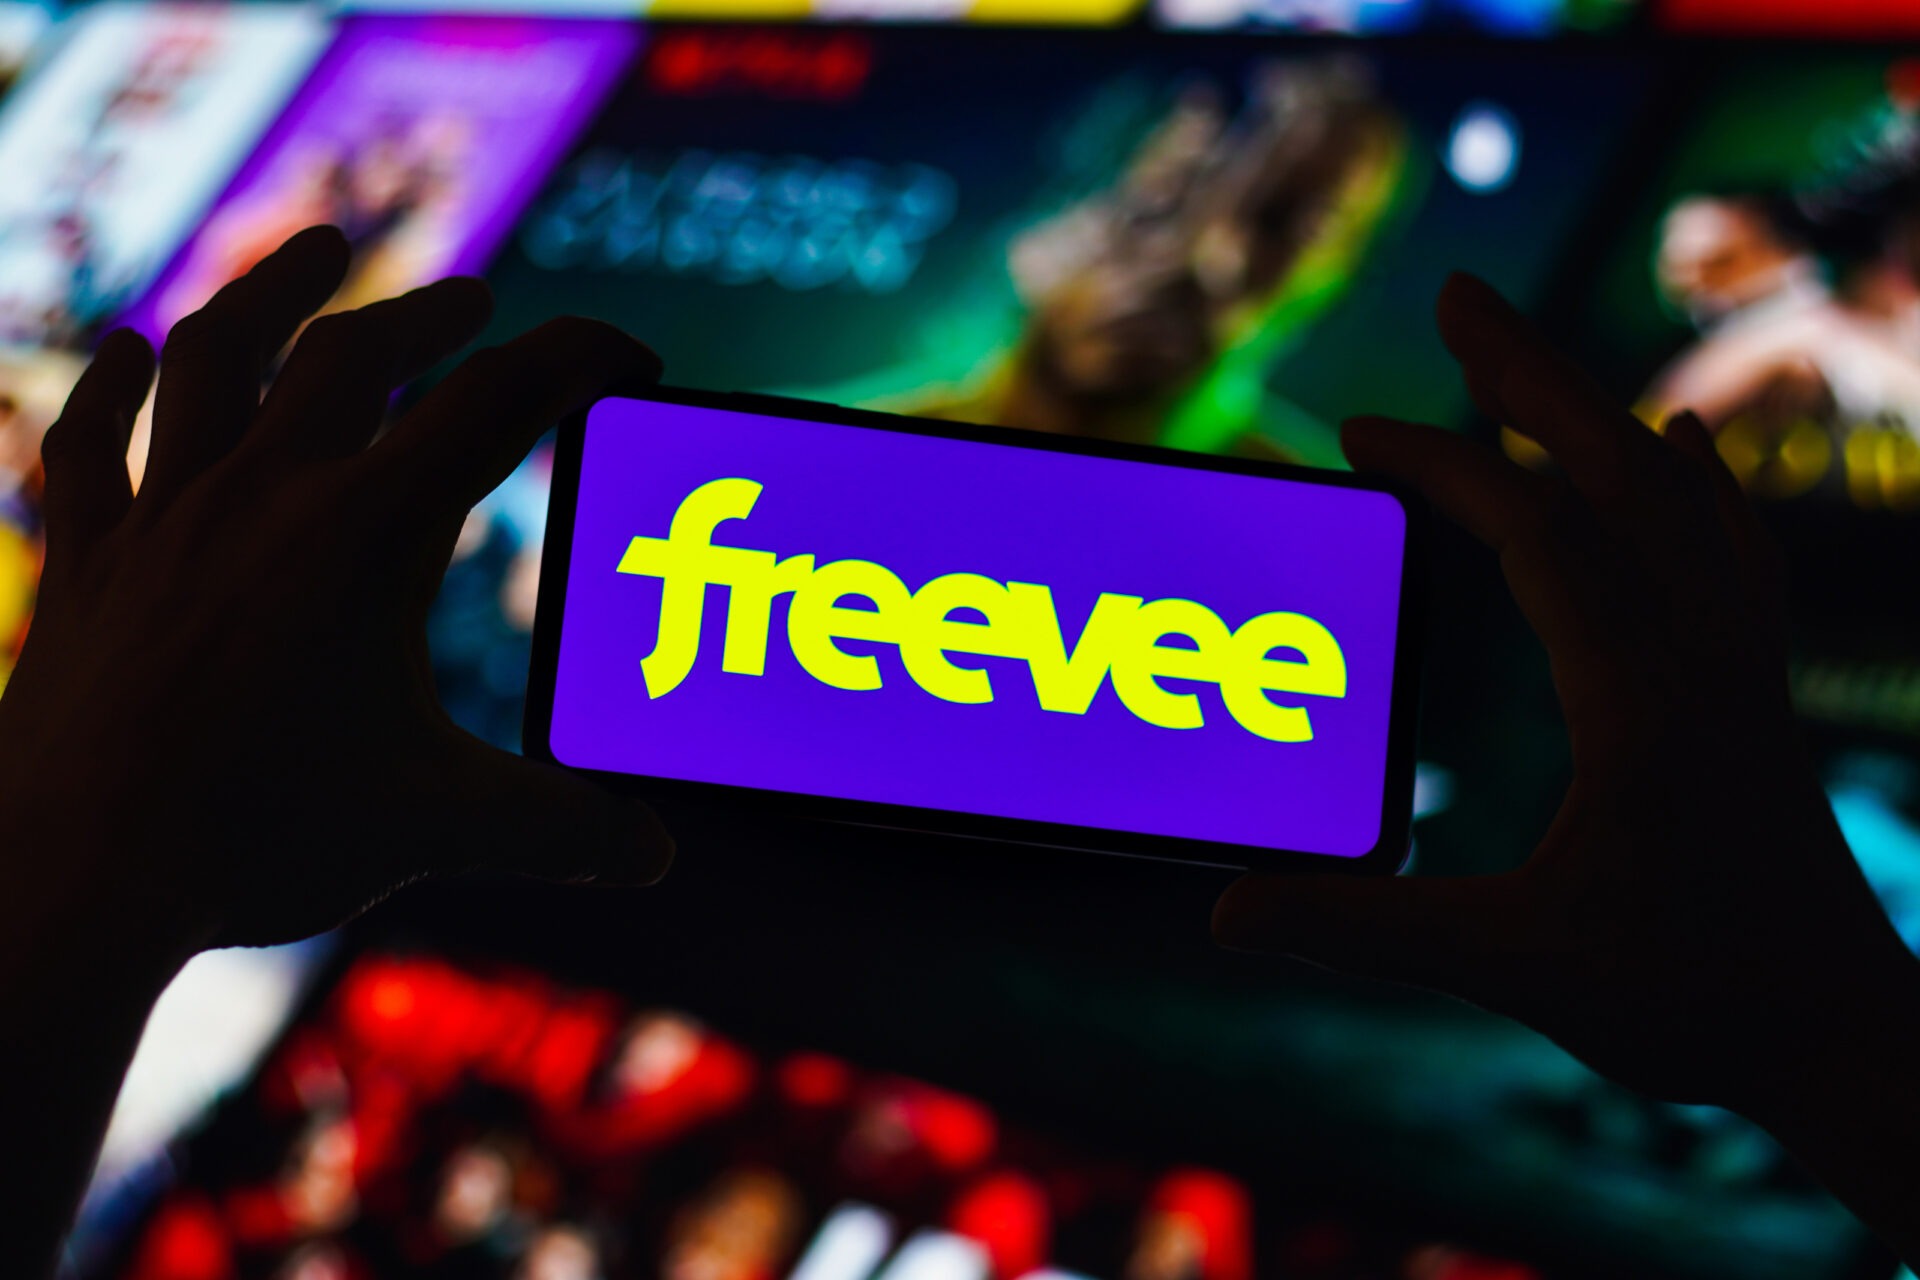 How To Watch Freevee Without Ads